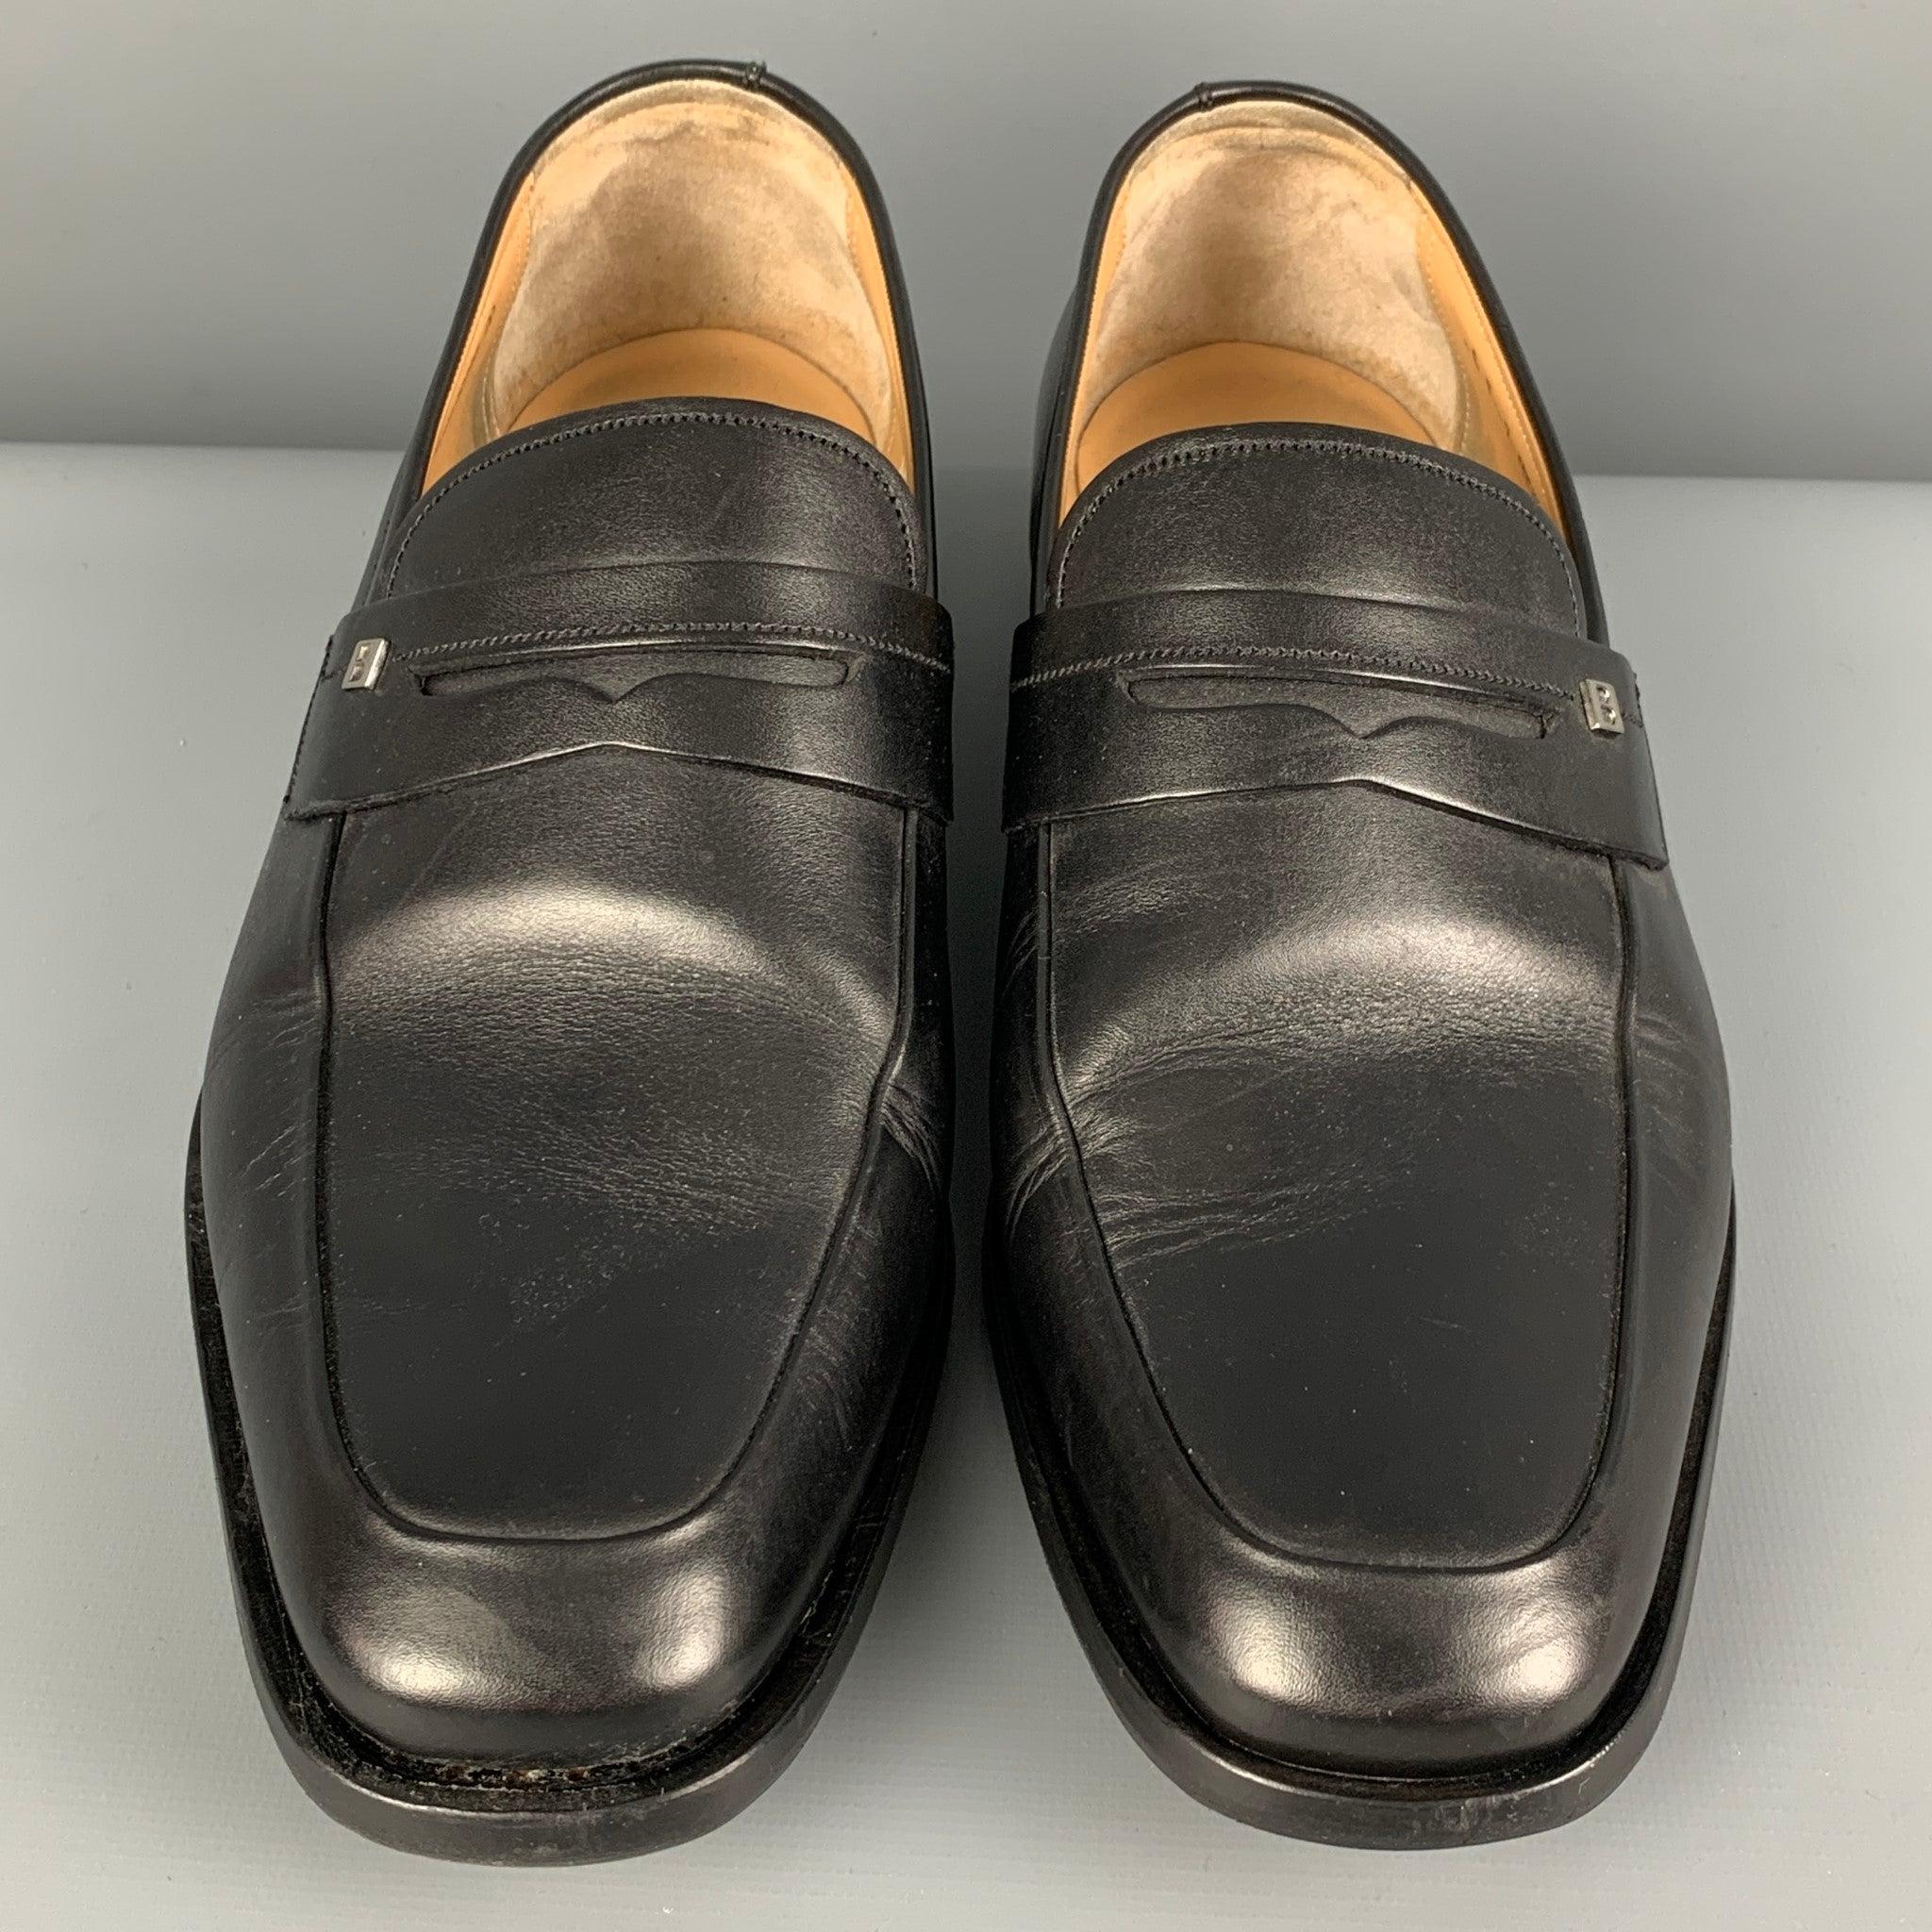 Men's BALLY Size 7 Black Leather Penny Loafers